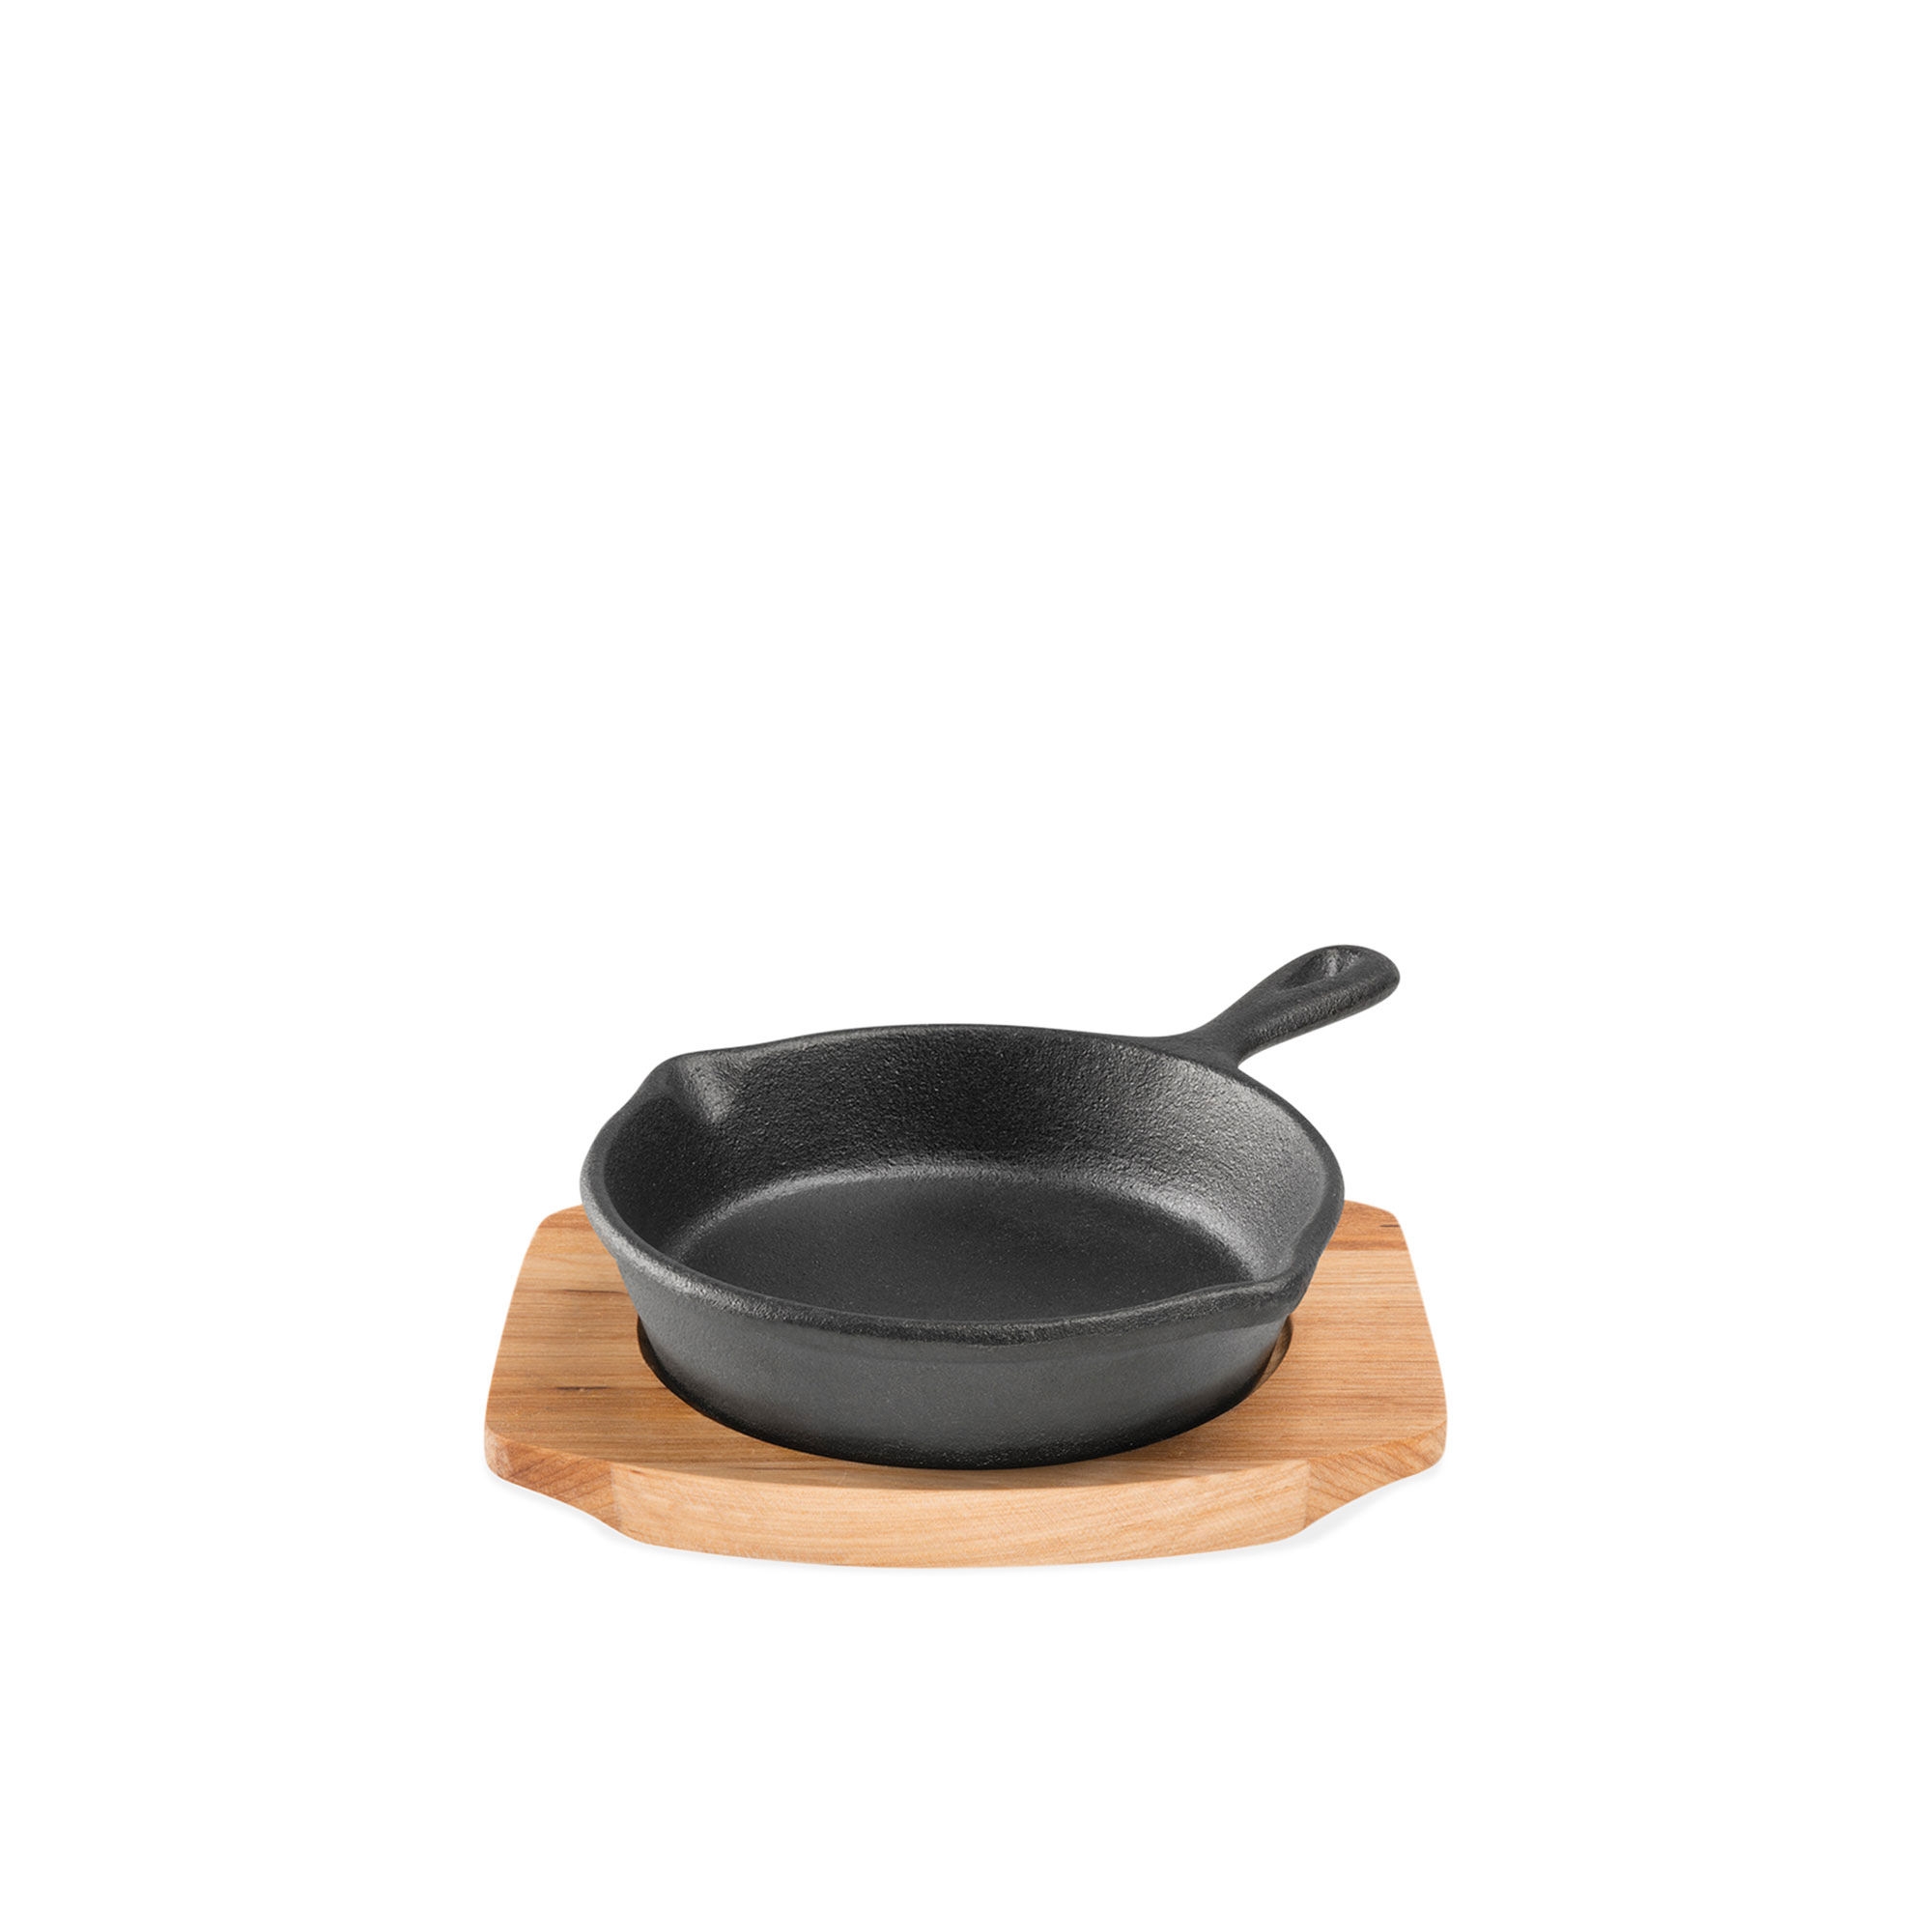 Pyrolux Pyrocast Cast Iron Skillet with Maple Tray 10cm Image 1